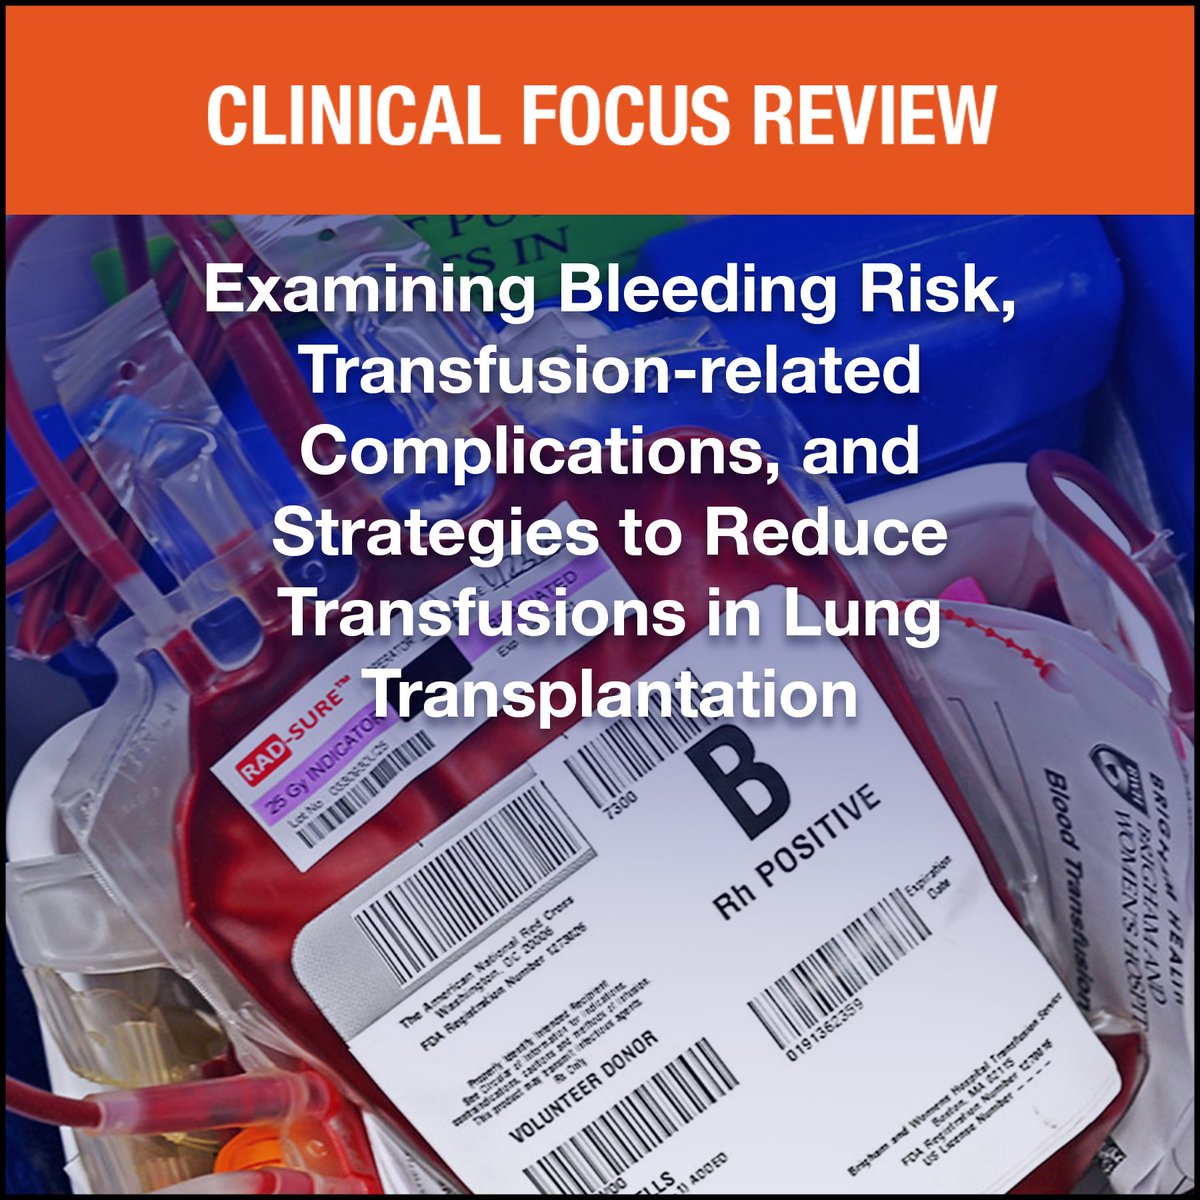 The latest “Clinical Focus Review” published in @_Anesthesiology examines transfusion-related complications as well as patient and procedural risk factors for bleeding and suggests strategies to reduce allogeneic blood product #transfusion. Read here: ow.ly/joKy50Rla9U